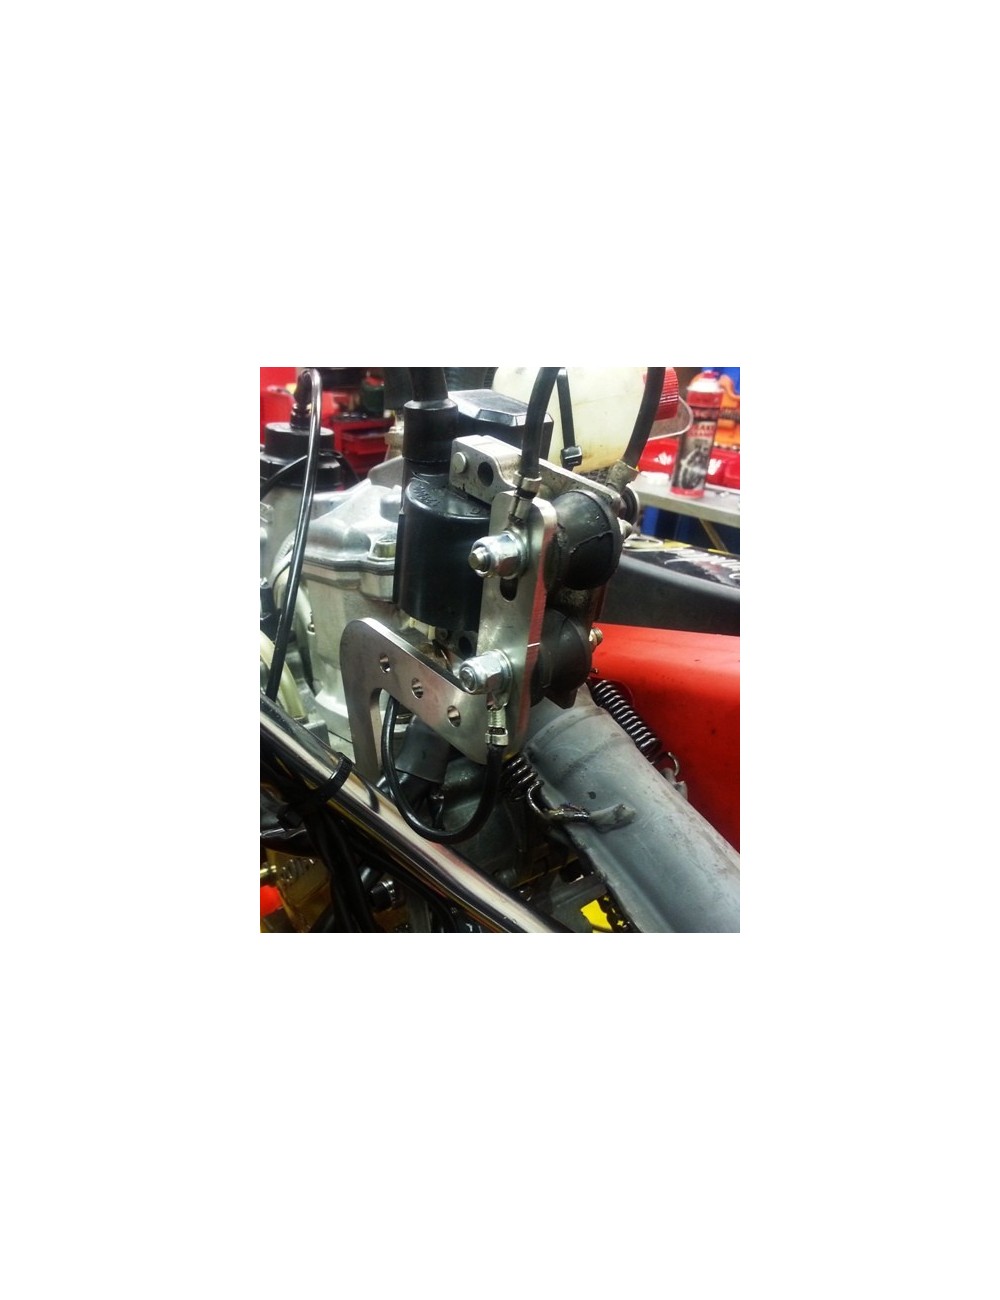 NEW-LINE HIGH-MOUNTING BRACKET FOR ROTAX